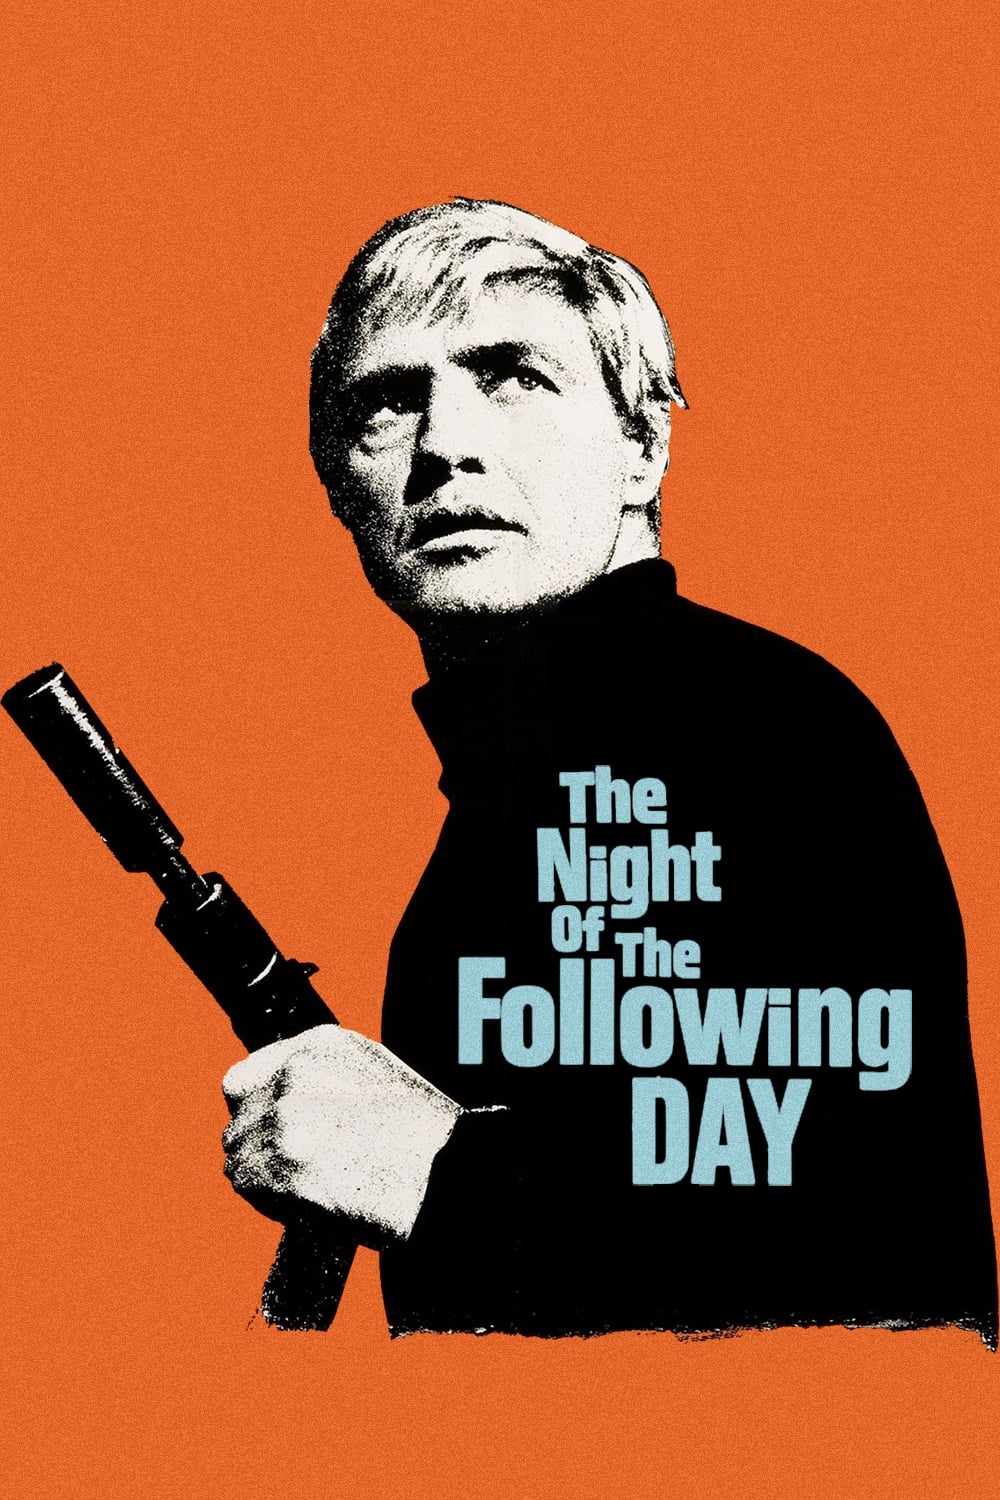 The Night of the Following Day (1969)